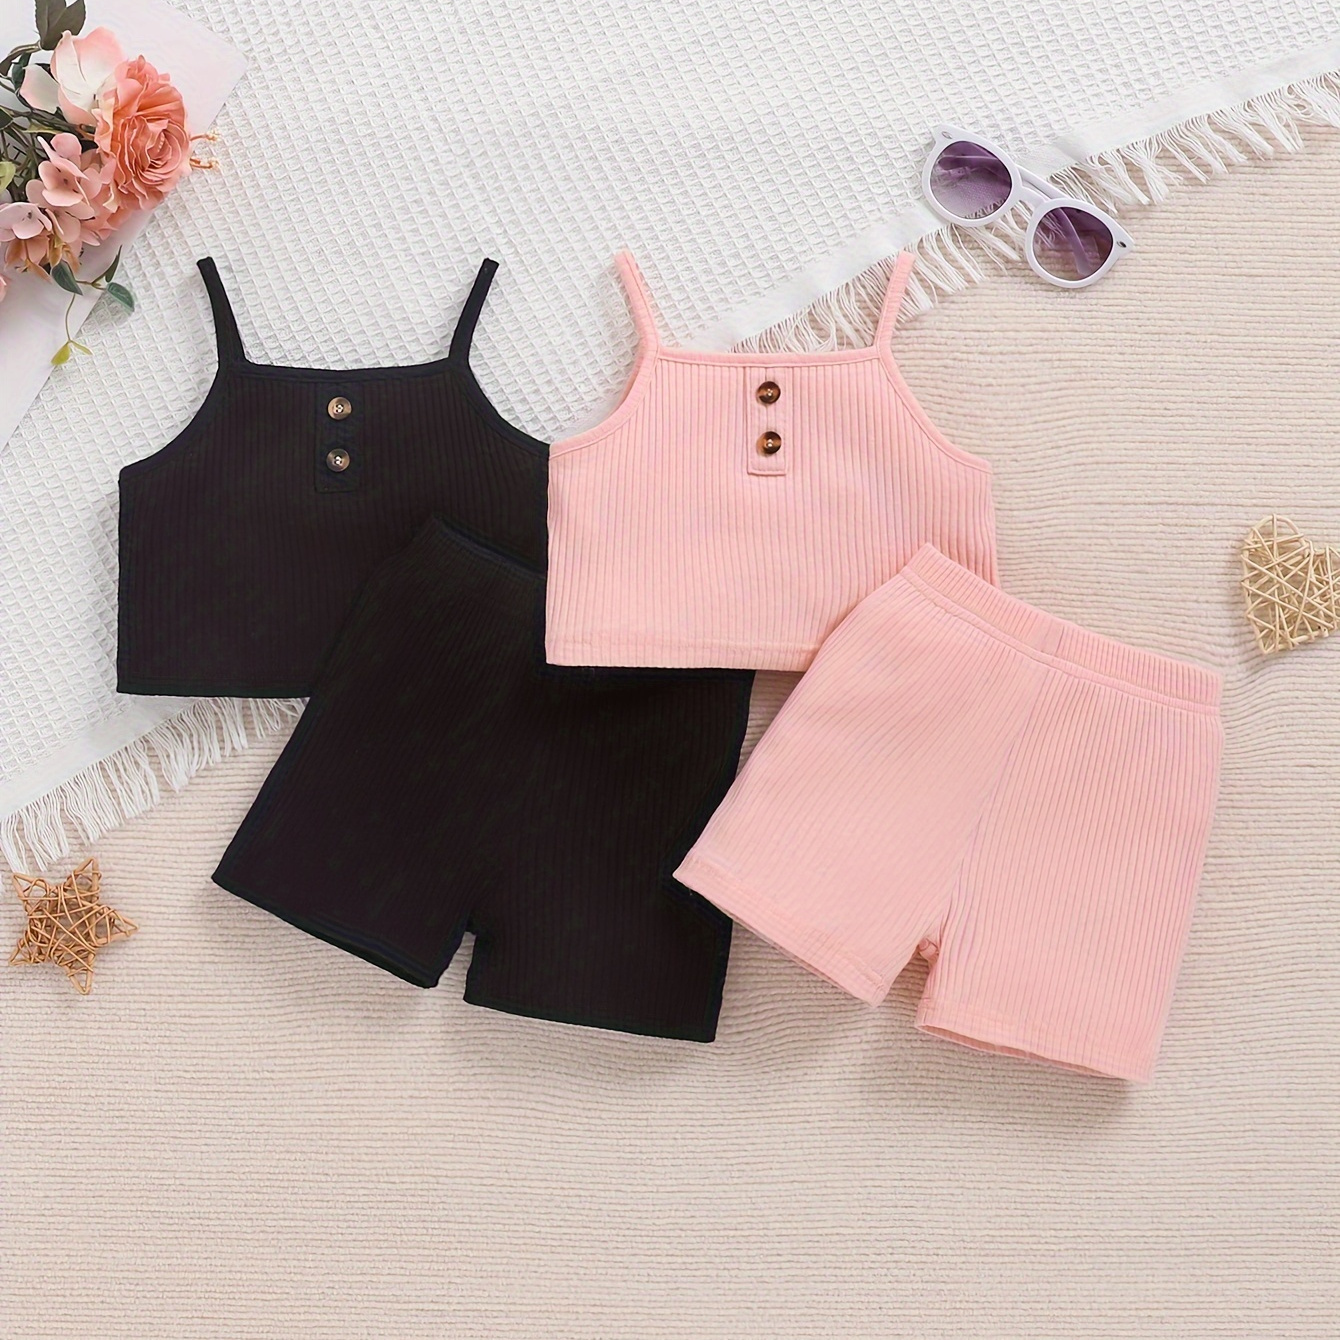 

4-piece Girls' Cotton Ribbed Tank Top & Shorts Set, Fashionable Solid Color Casual Outfits For Kids, Sleeveless Crop Top With Button Detail, Cozy Summer Lounge Wear